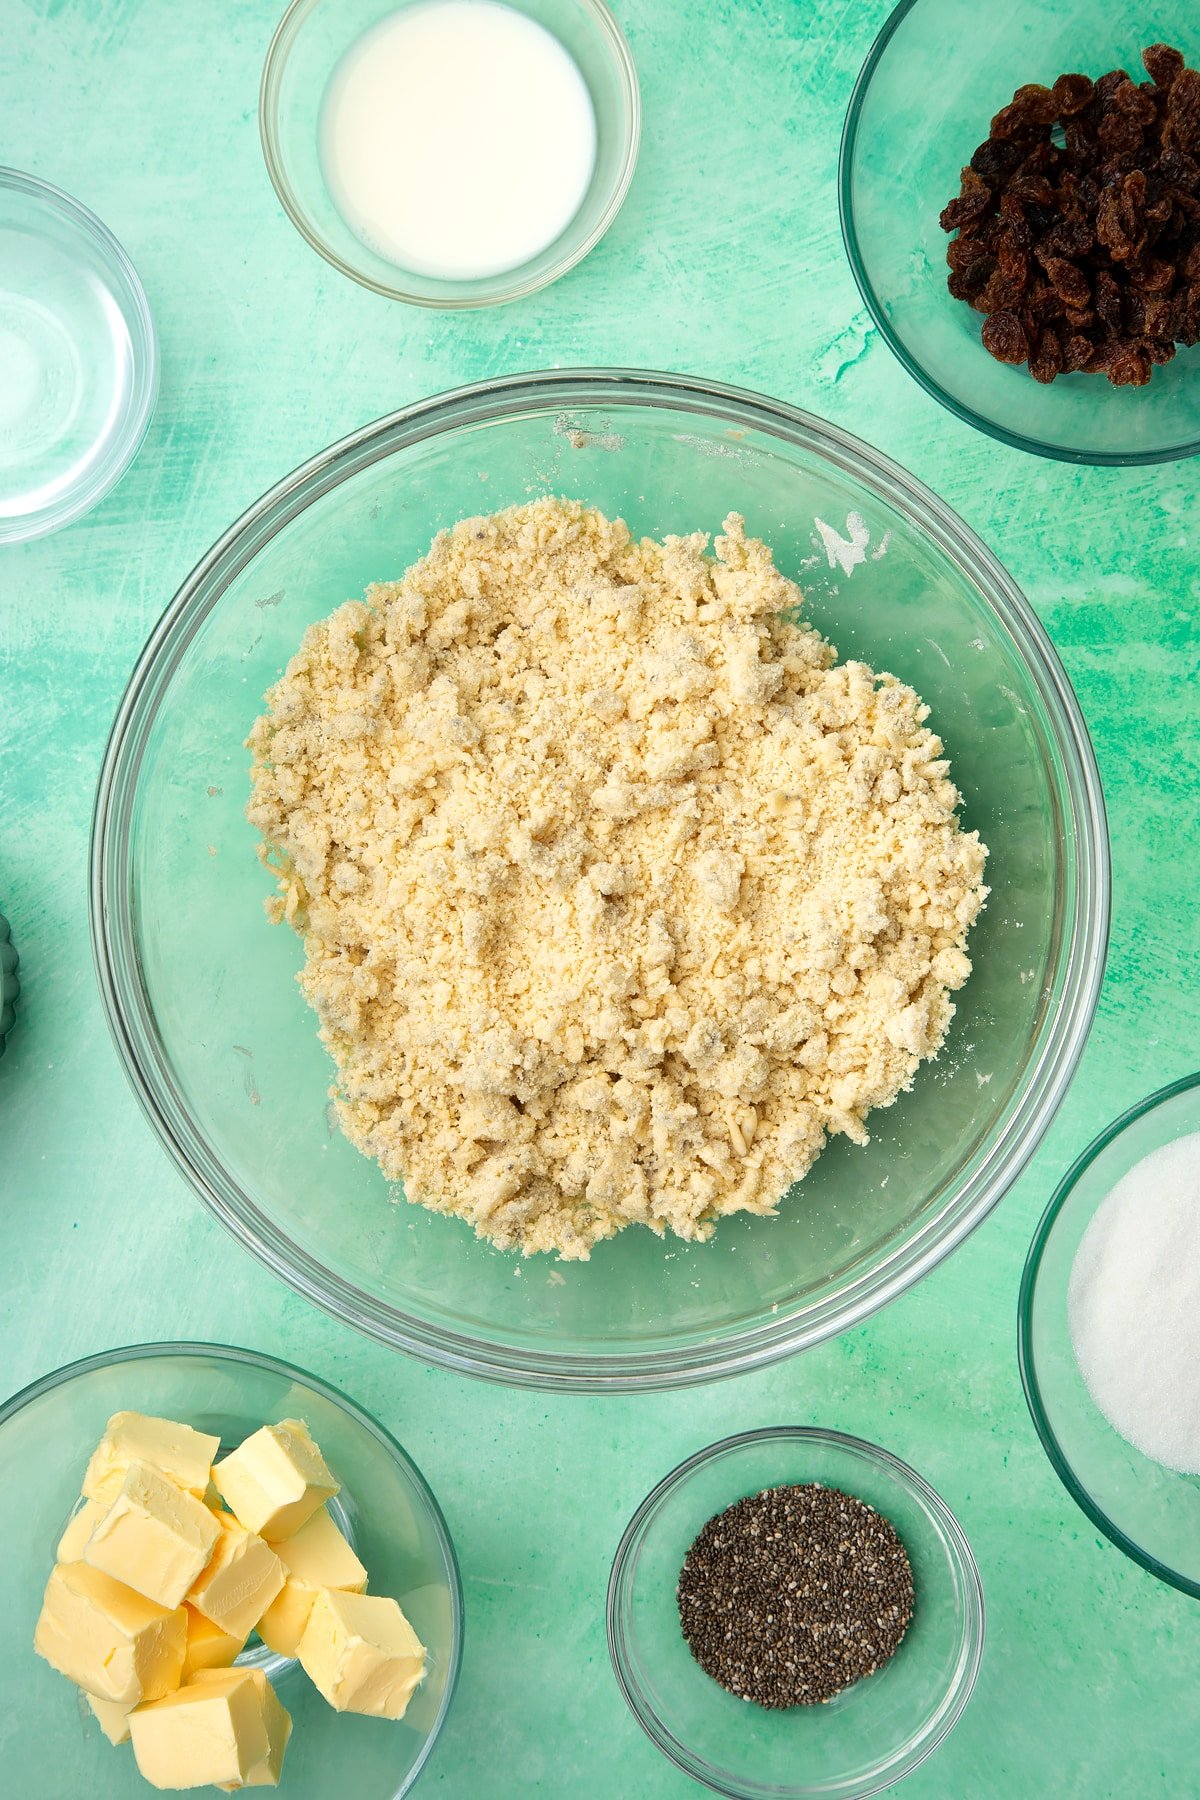 A glass mixing bowl containing self-raising flour, vegan margarine, chia seeds and sugar mixed together. Ingredients to make vegan Welsh cakes surround the bowl.